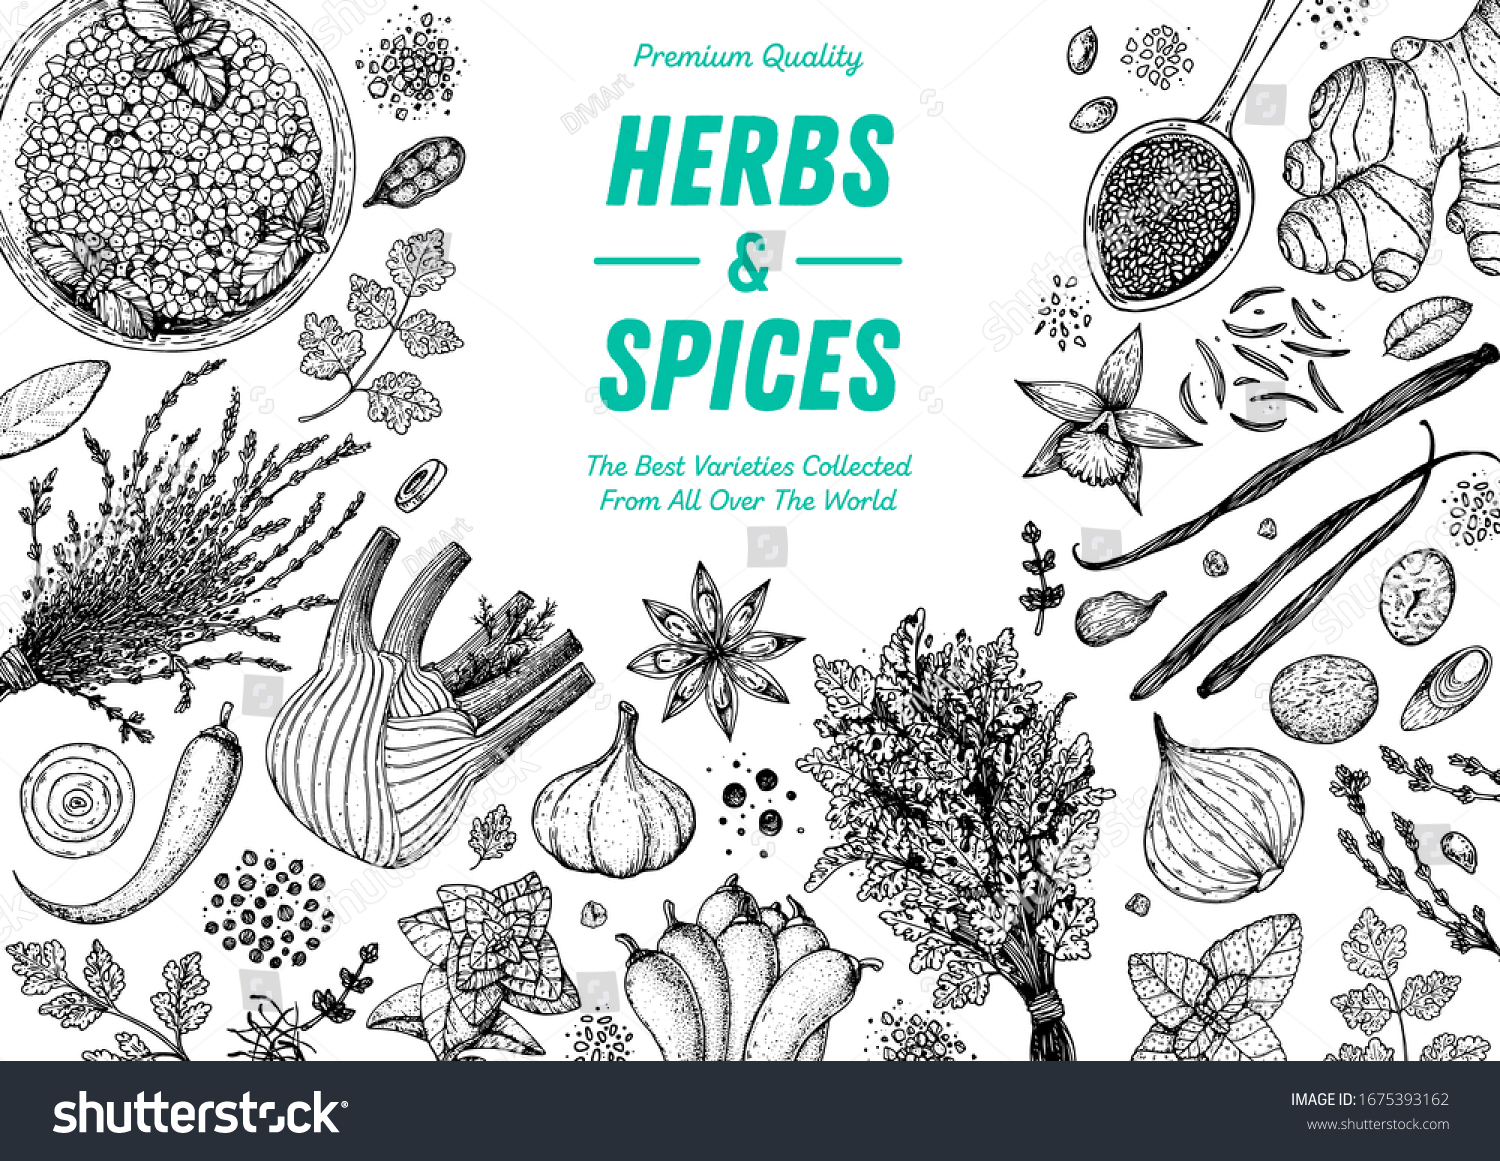 Herbs and spices hand drawn vector illustration. Aromatic plants. Hand drawn food sketch. Vintage illustration. Card design. Sketch style. Spice and herbs black and white design. #1675393162